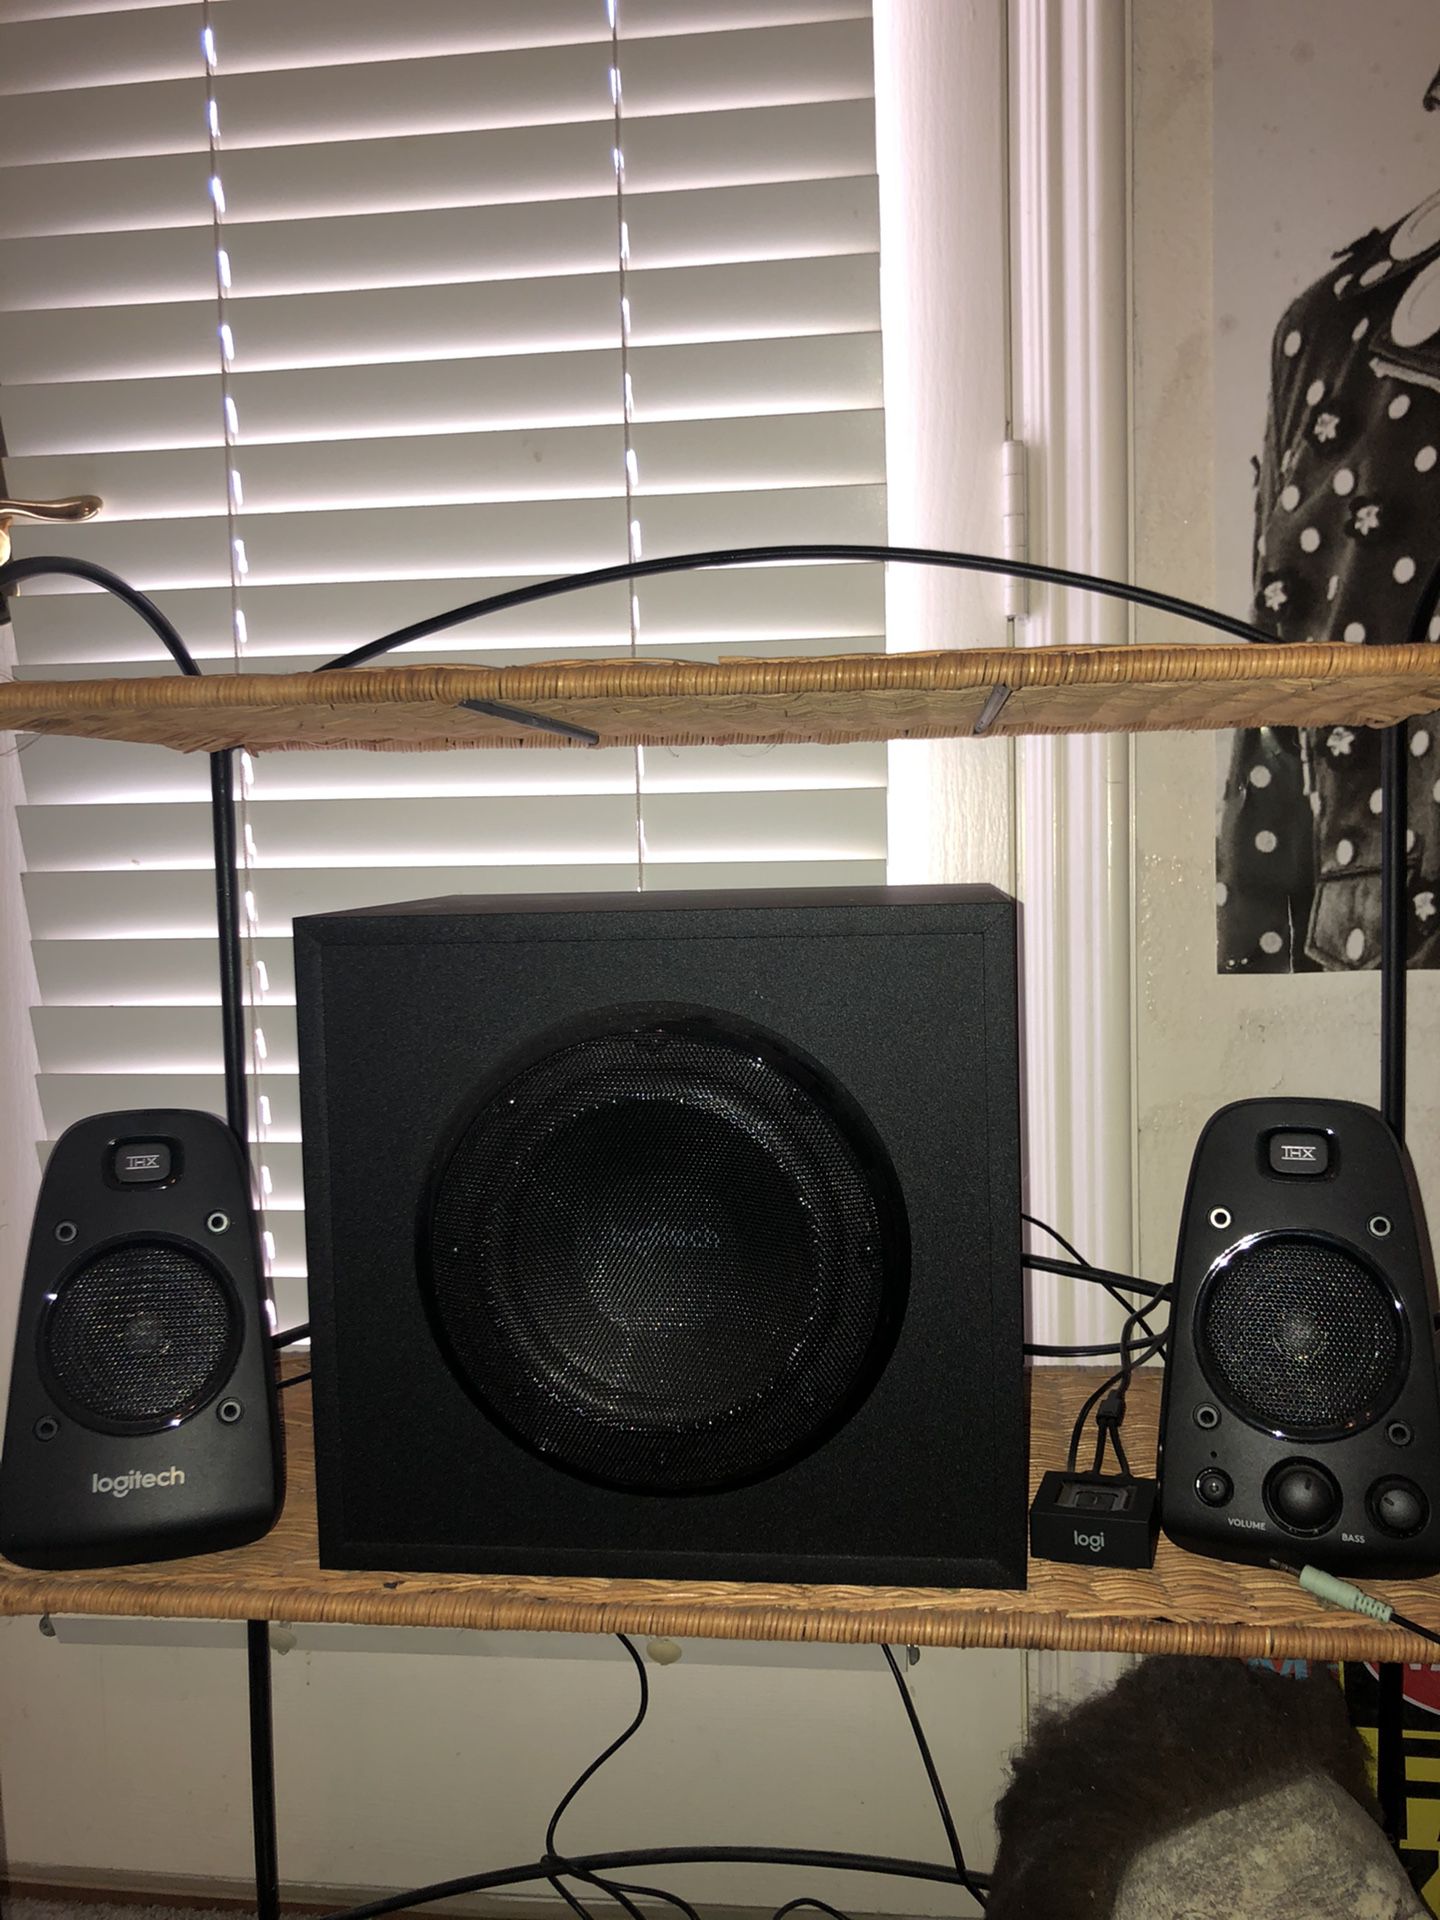 Logitech subwoofer/speaker. Comes with aux chord, and a adapter so you can do Bluetooth. Everything works in perfect condition.